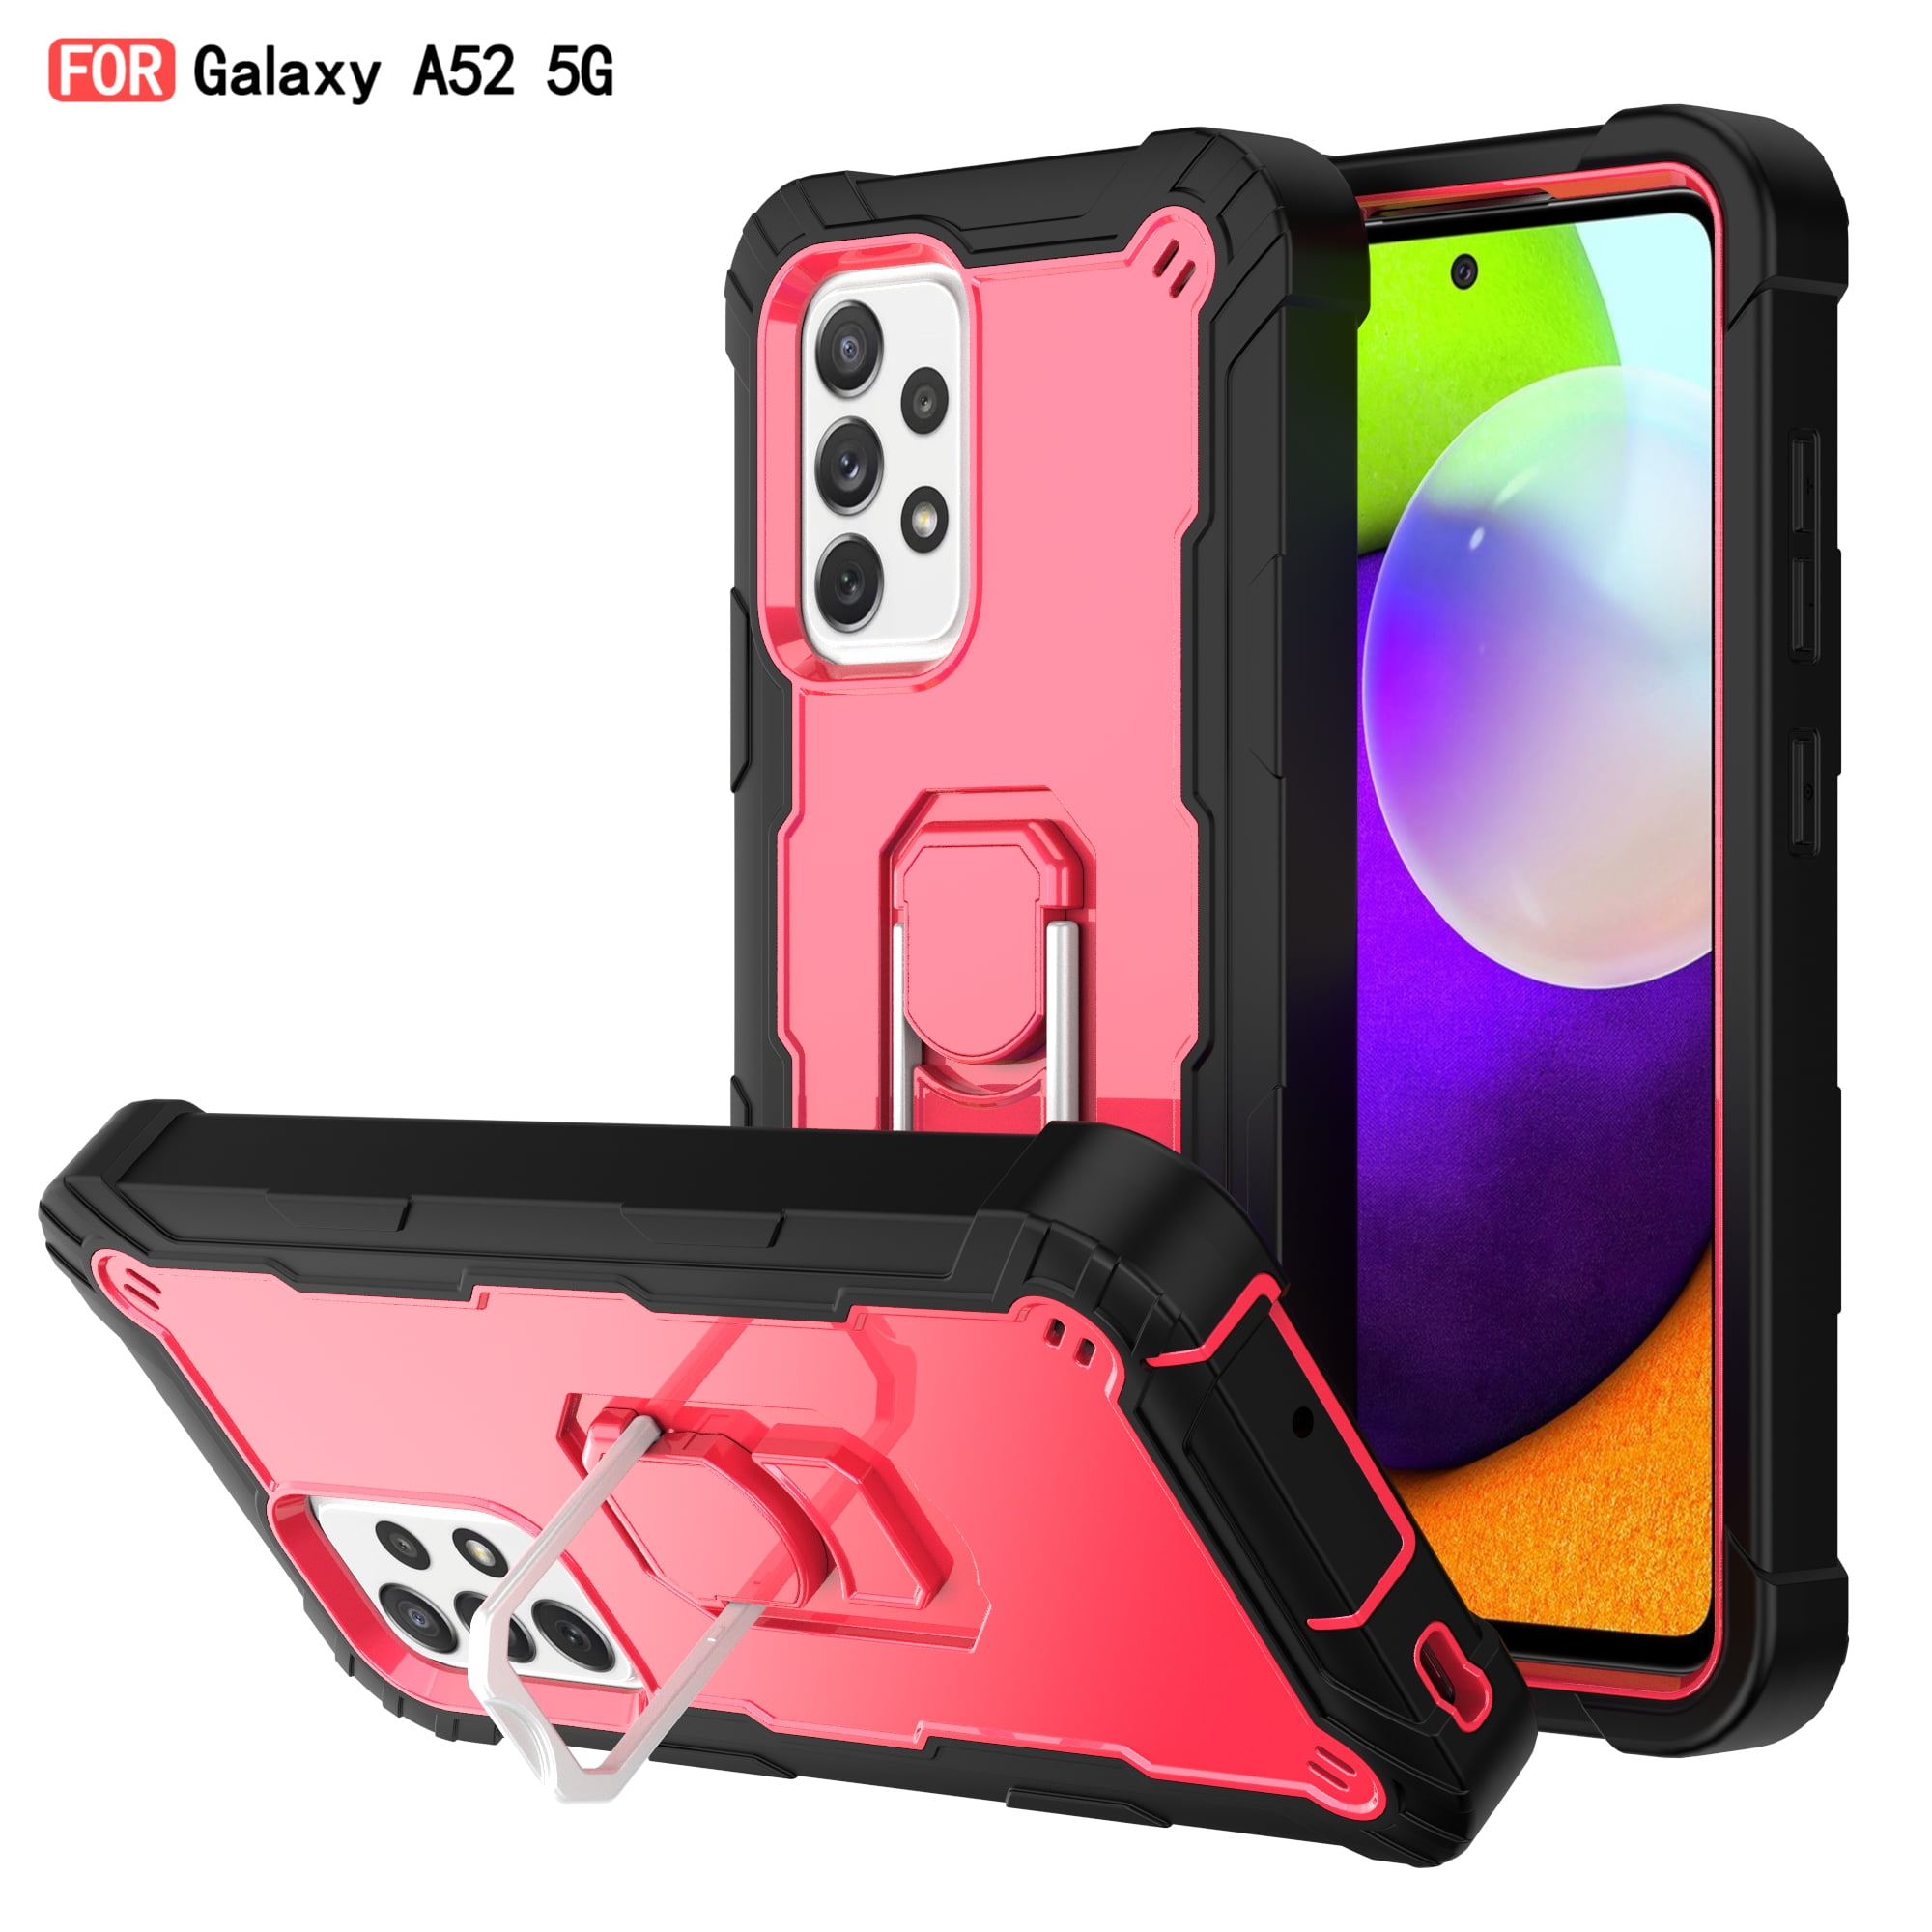 Galaxy S21 Case,Marrkey Full Body Protective Cover Heavy Duty Shockproof  [Tough Armour] Aluminum Alloy Metal Case with Silicone Built-in Screen